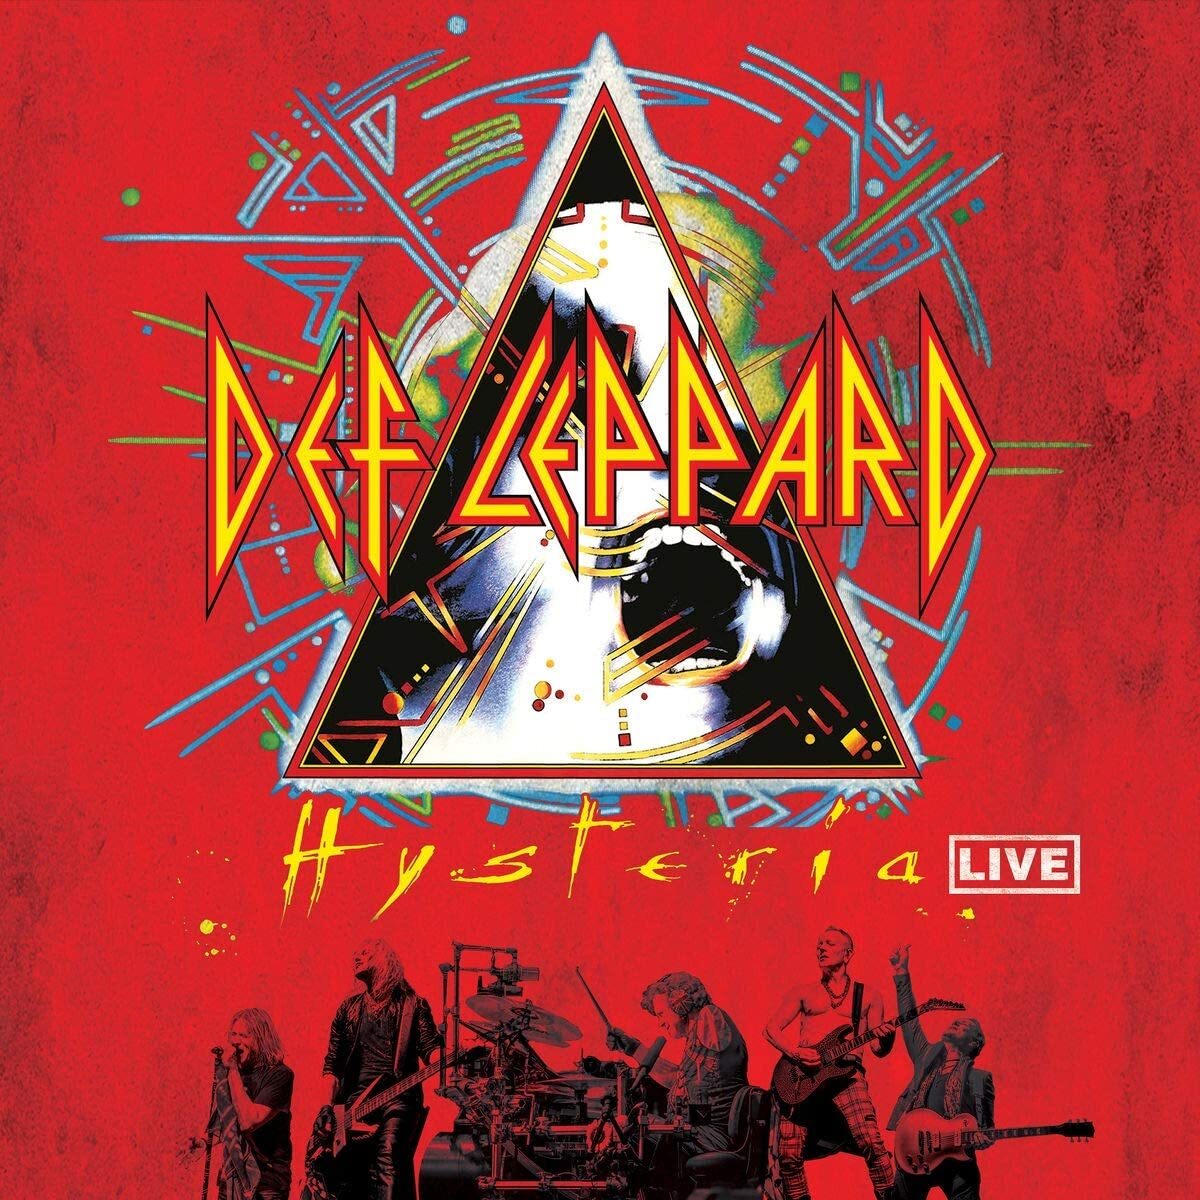 Def Leppard Hysteria Live Limited Clear Vinyl 2 Lp For Sale Online And In Store Mont Albert North Me